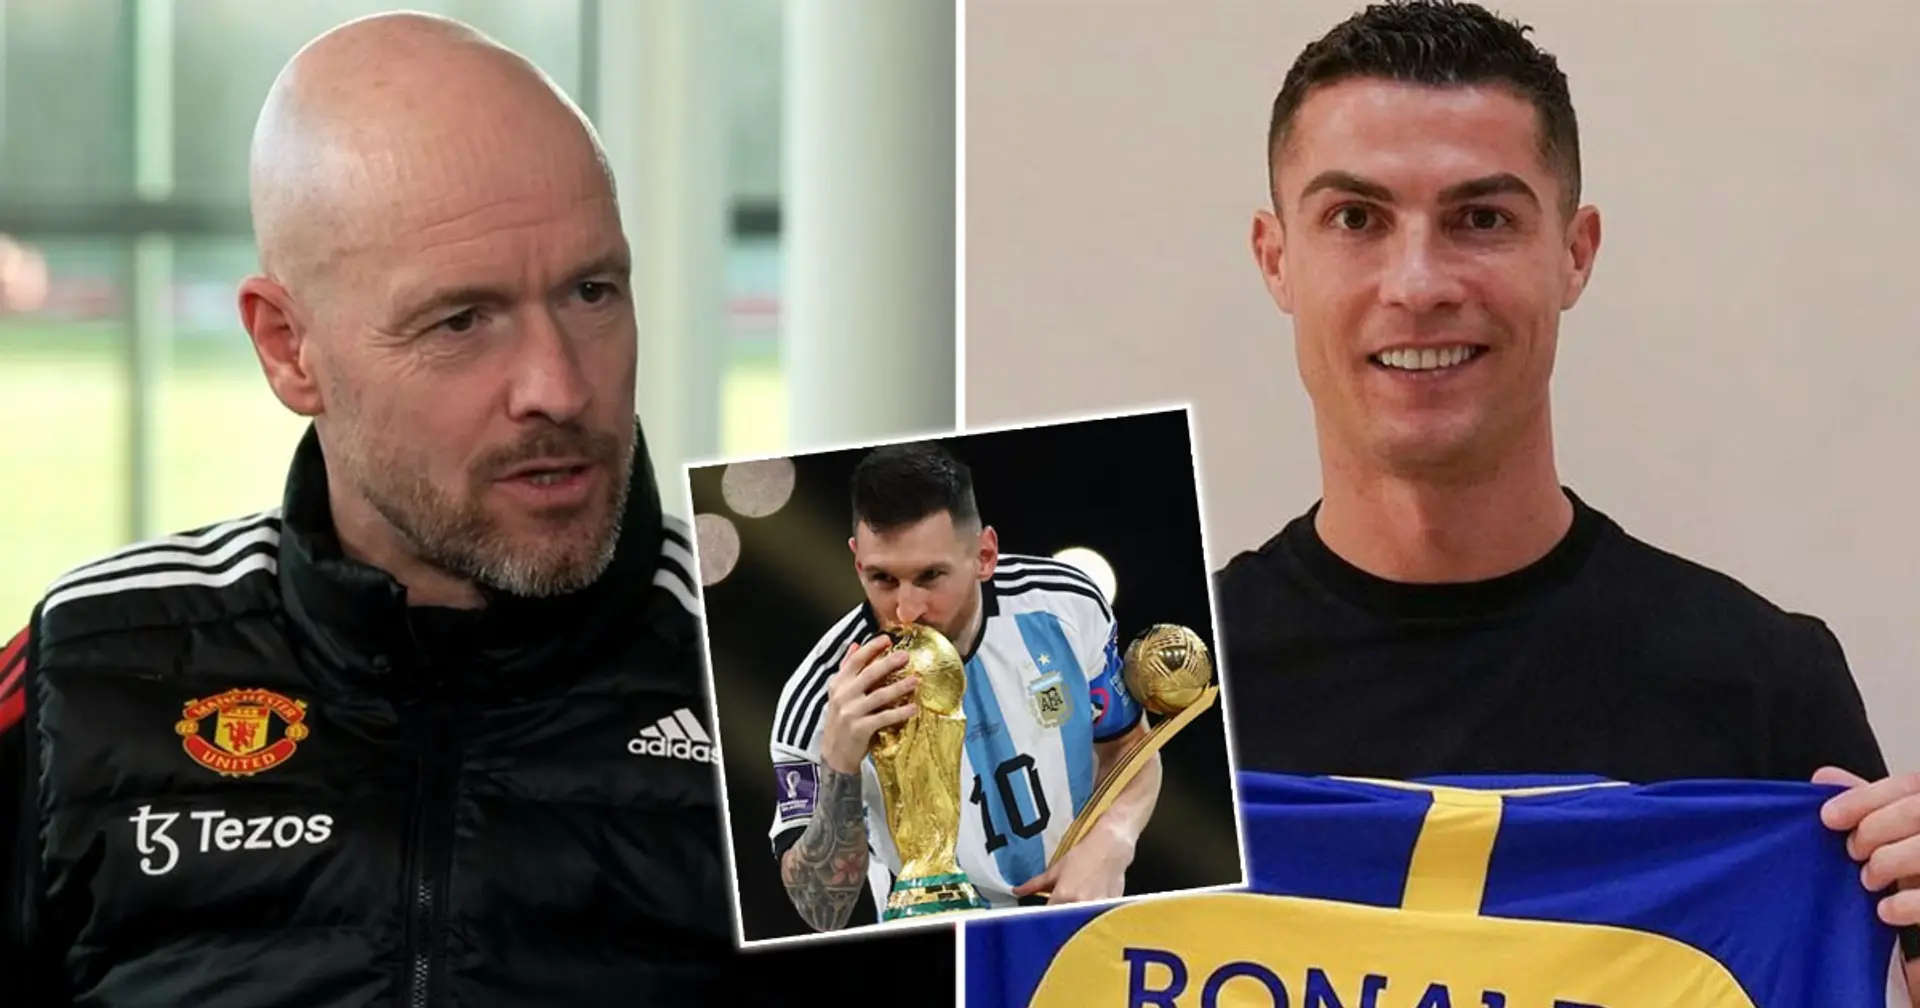 'There's only one Messi': Ten Hag may have taken a dig at Ronaldo in latest interview